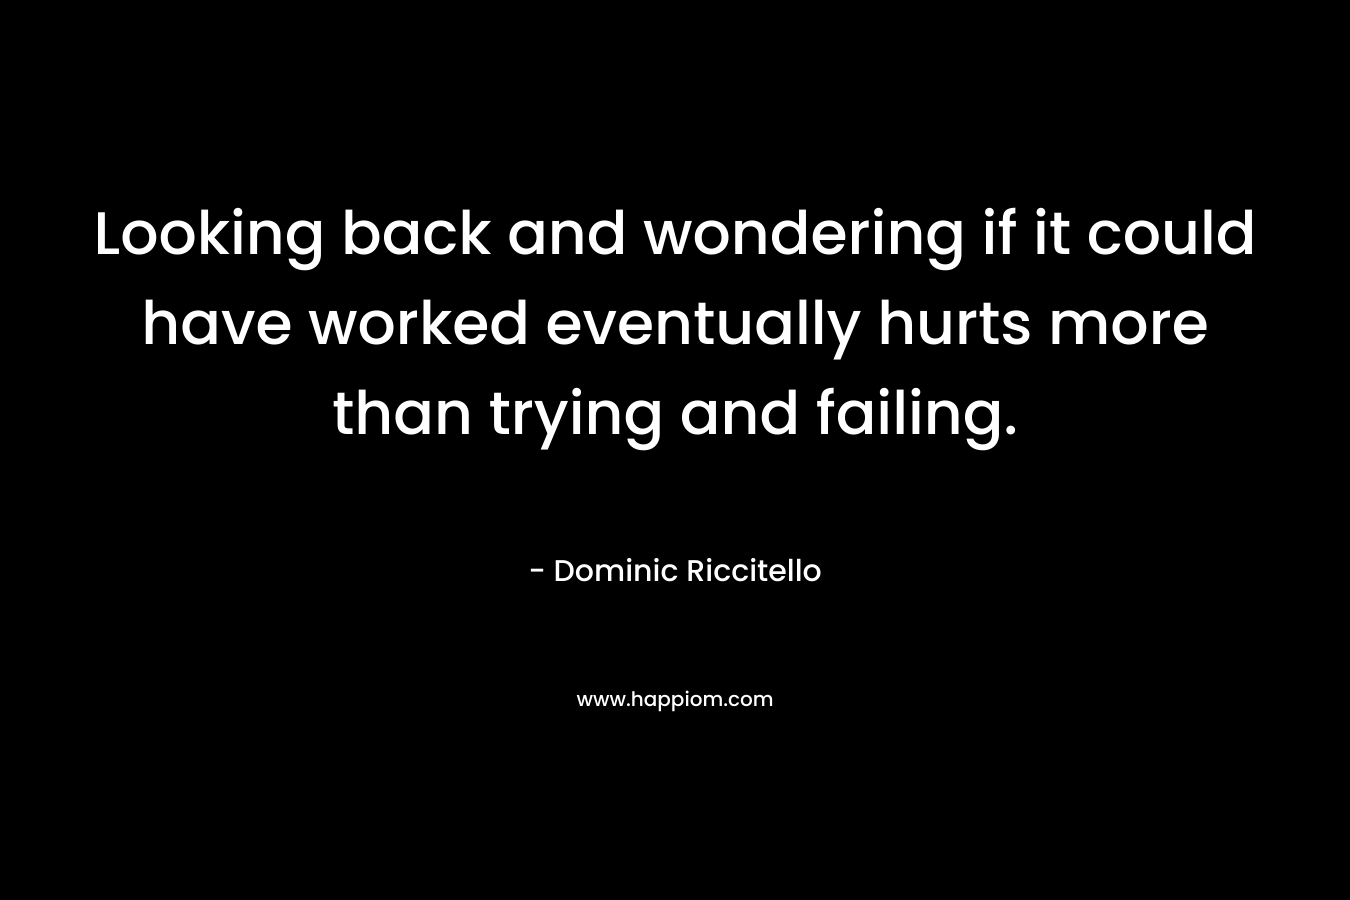 Looking back and wondering if it could have worked eventually hurts more than trying and failing.